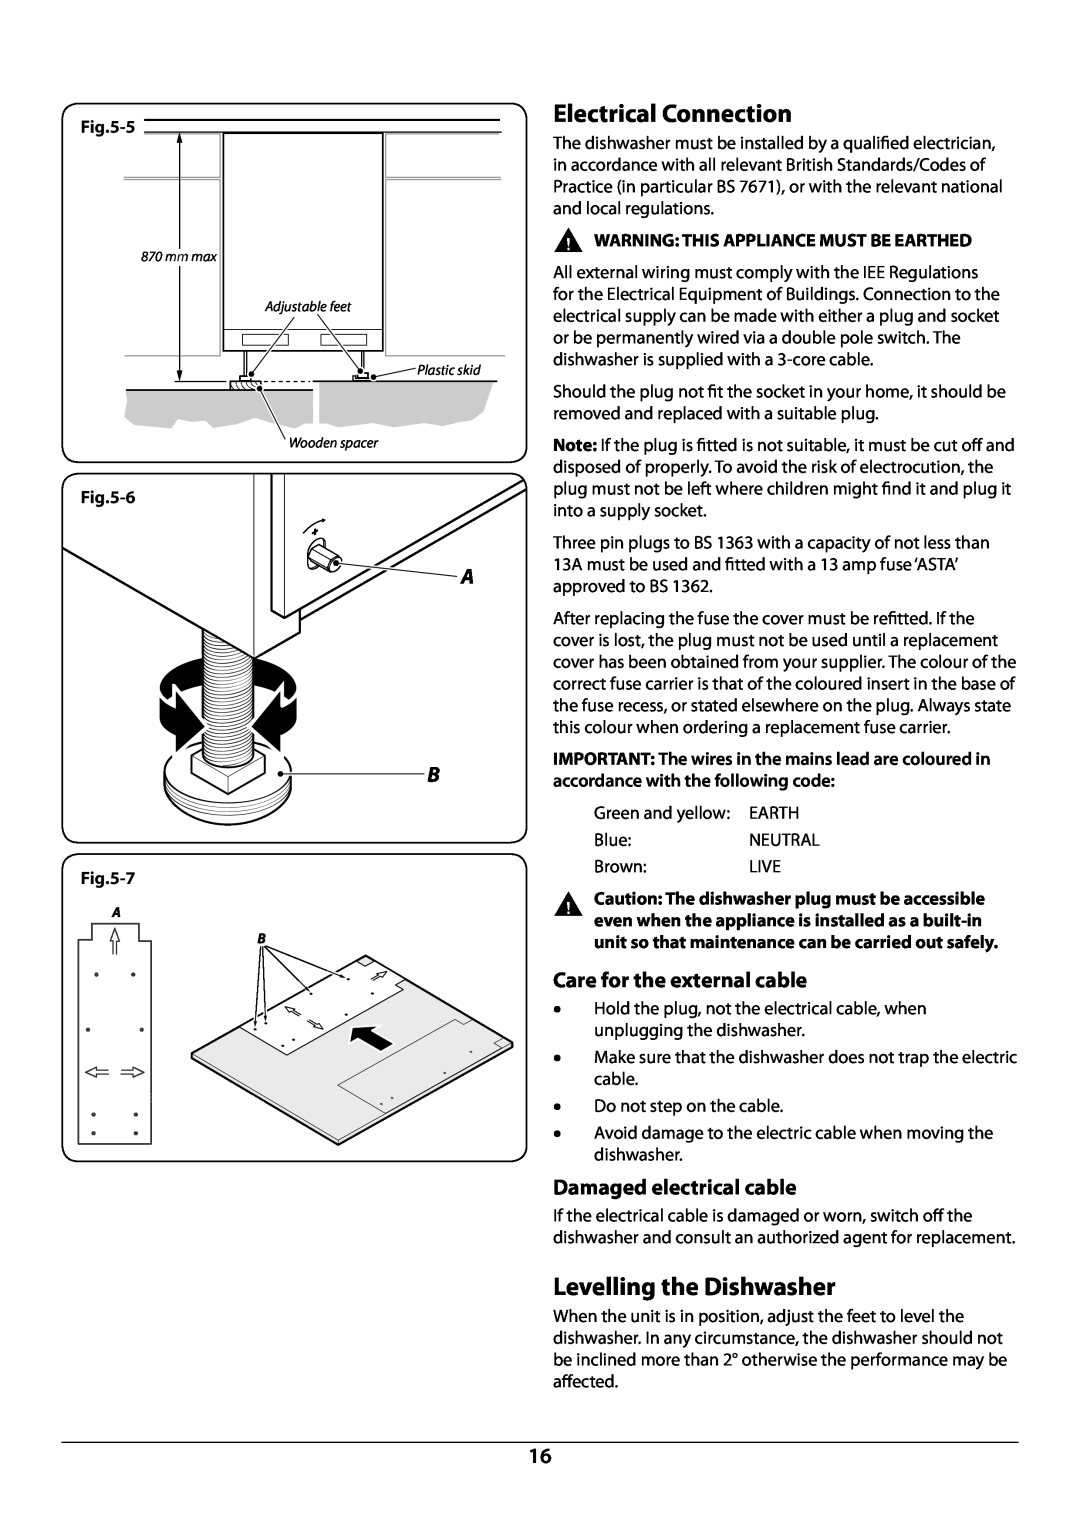 Rangemaster RDW945FI manual Electrical Connection, Levelling the Dishwasher, Care for the external cable 